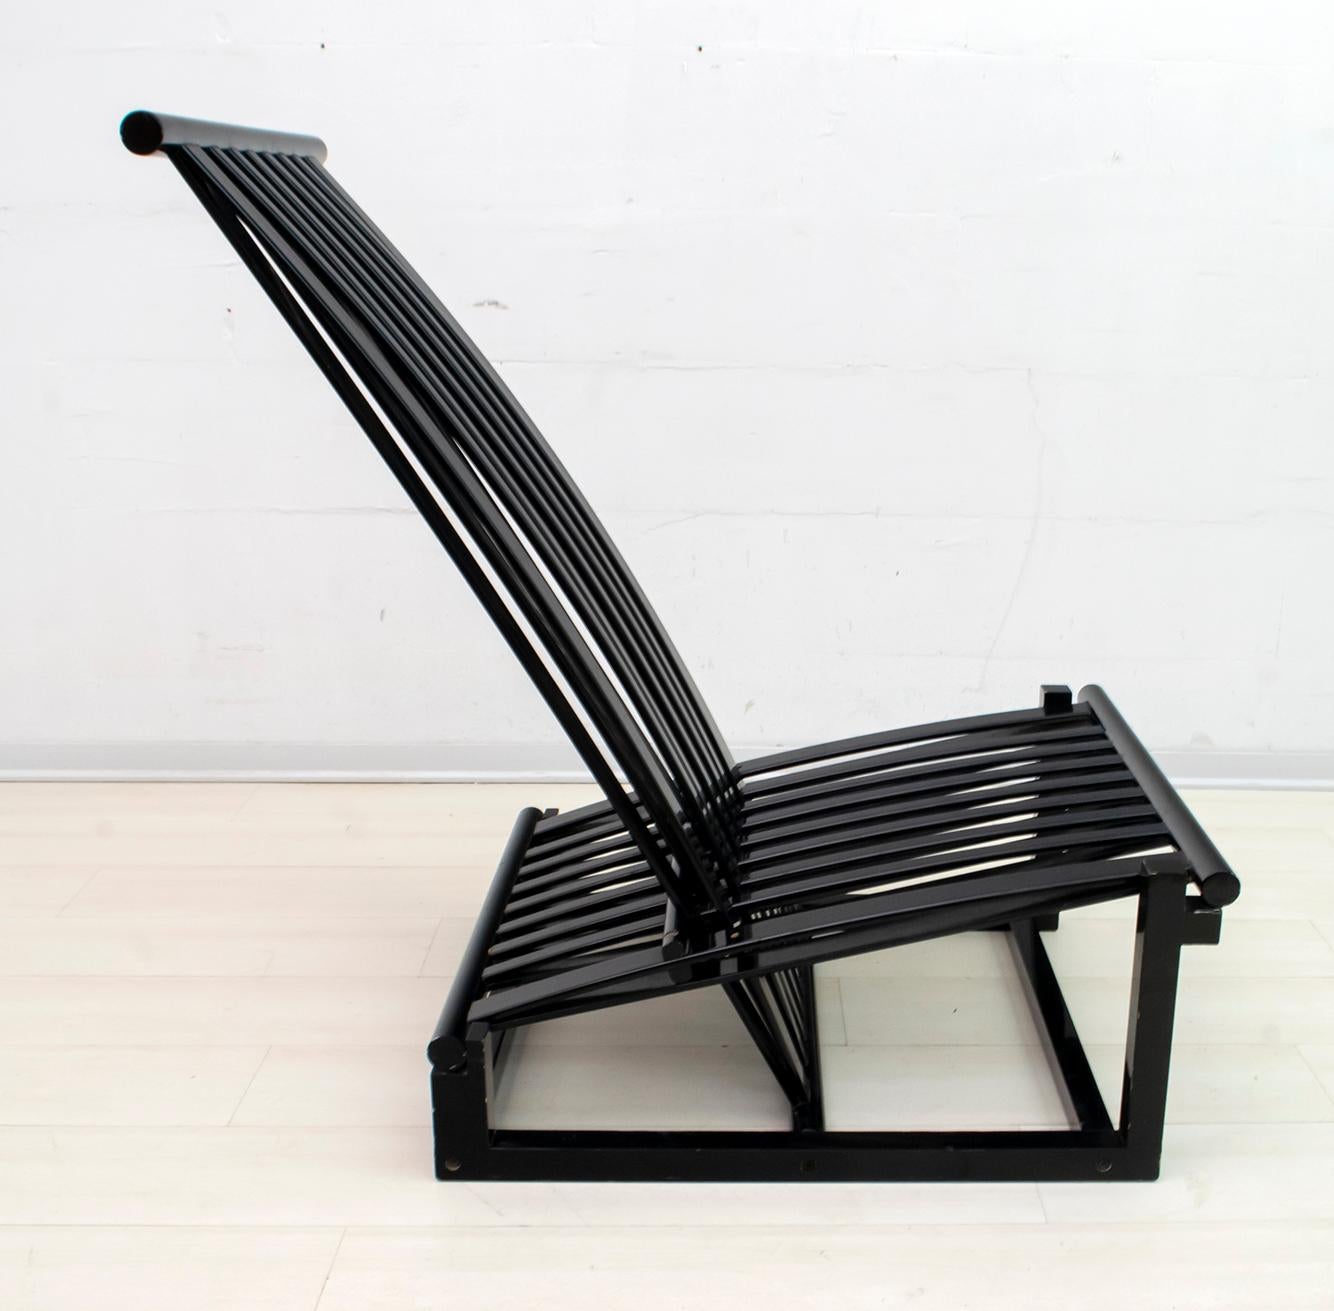 Relax armchair designed by the Italian architect Carlo Pagella and produced by Romanutti in the 1970s. The armchair is in curved ash and black lacquered, as in the photo, the back changes position.